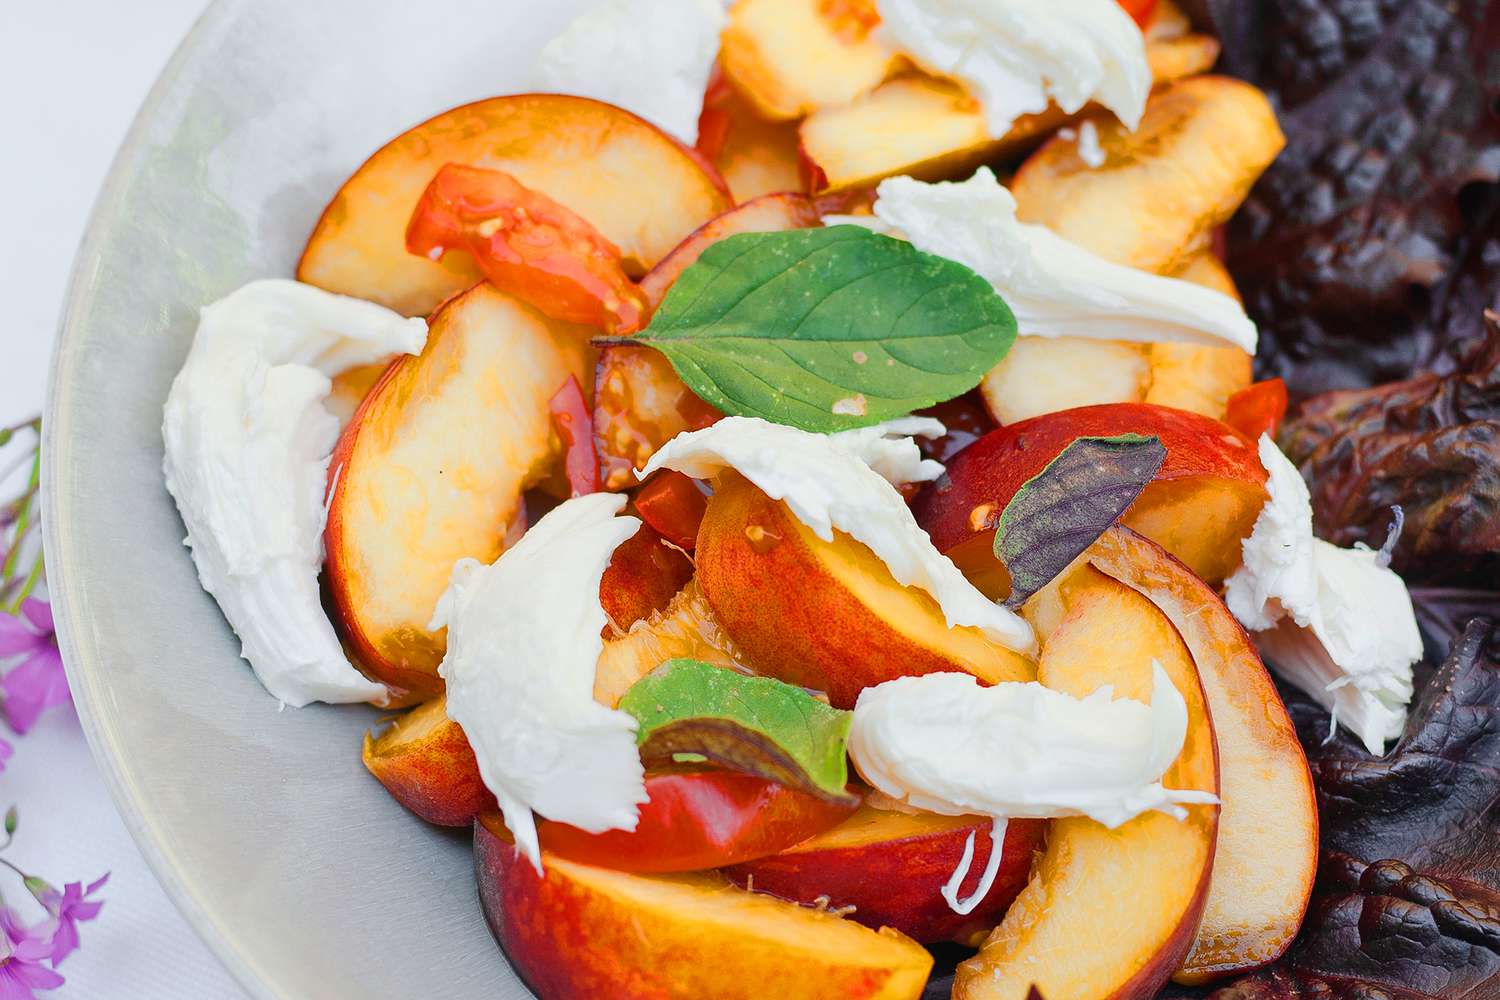 Summer salad with burrata, tomatoes, and nectarines